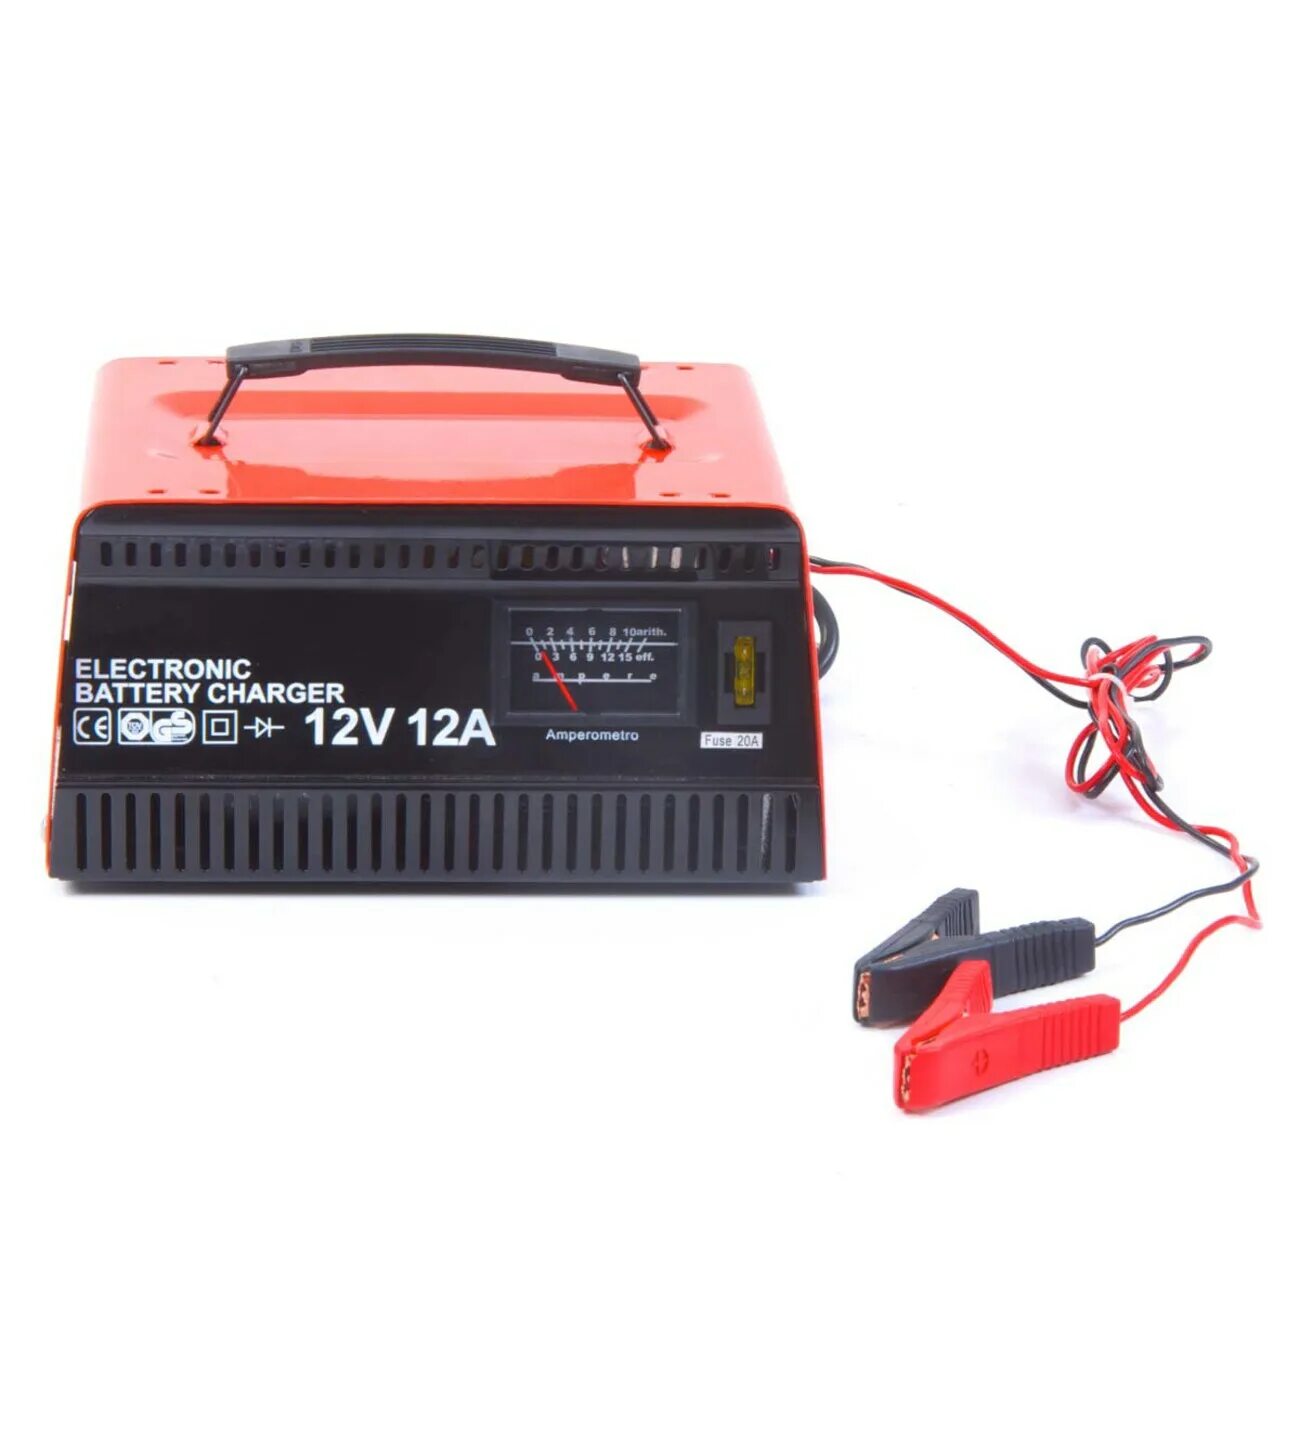 NGL 12v 12a. Made in China 27a 12v Ultra. Electrical battery